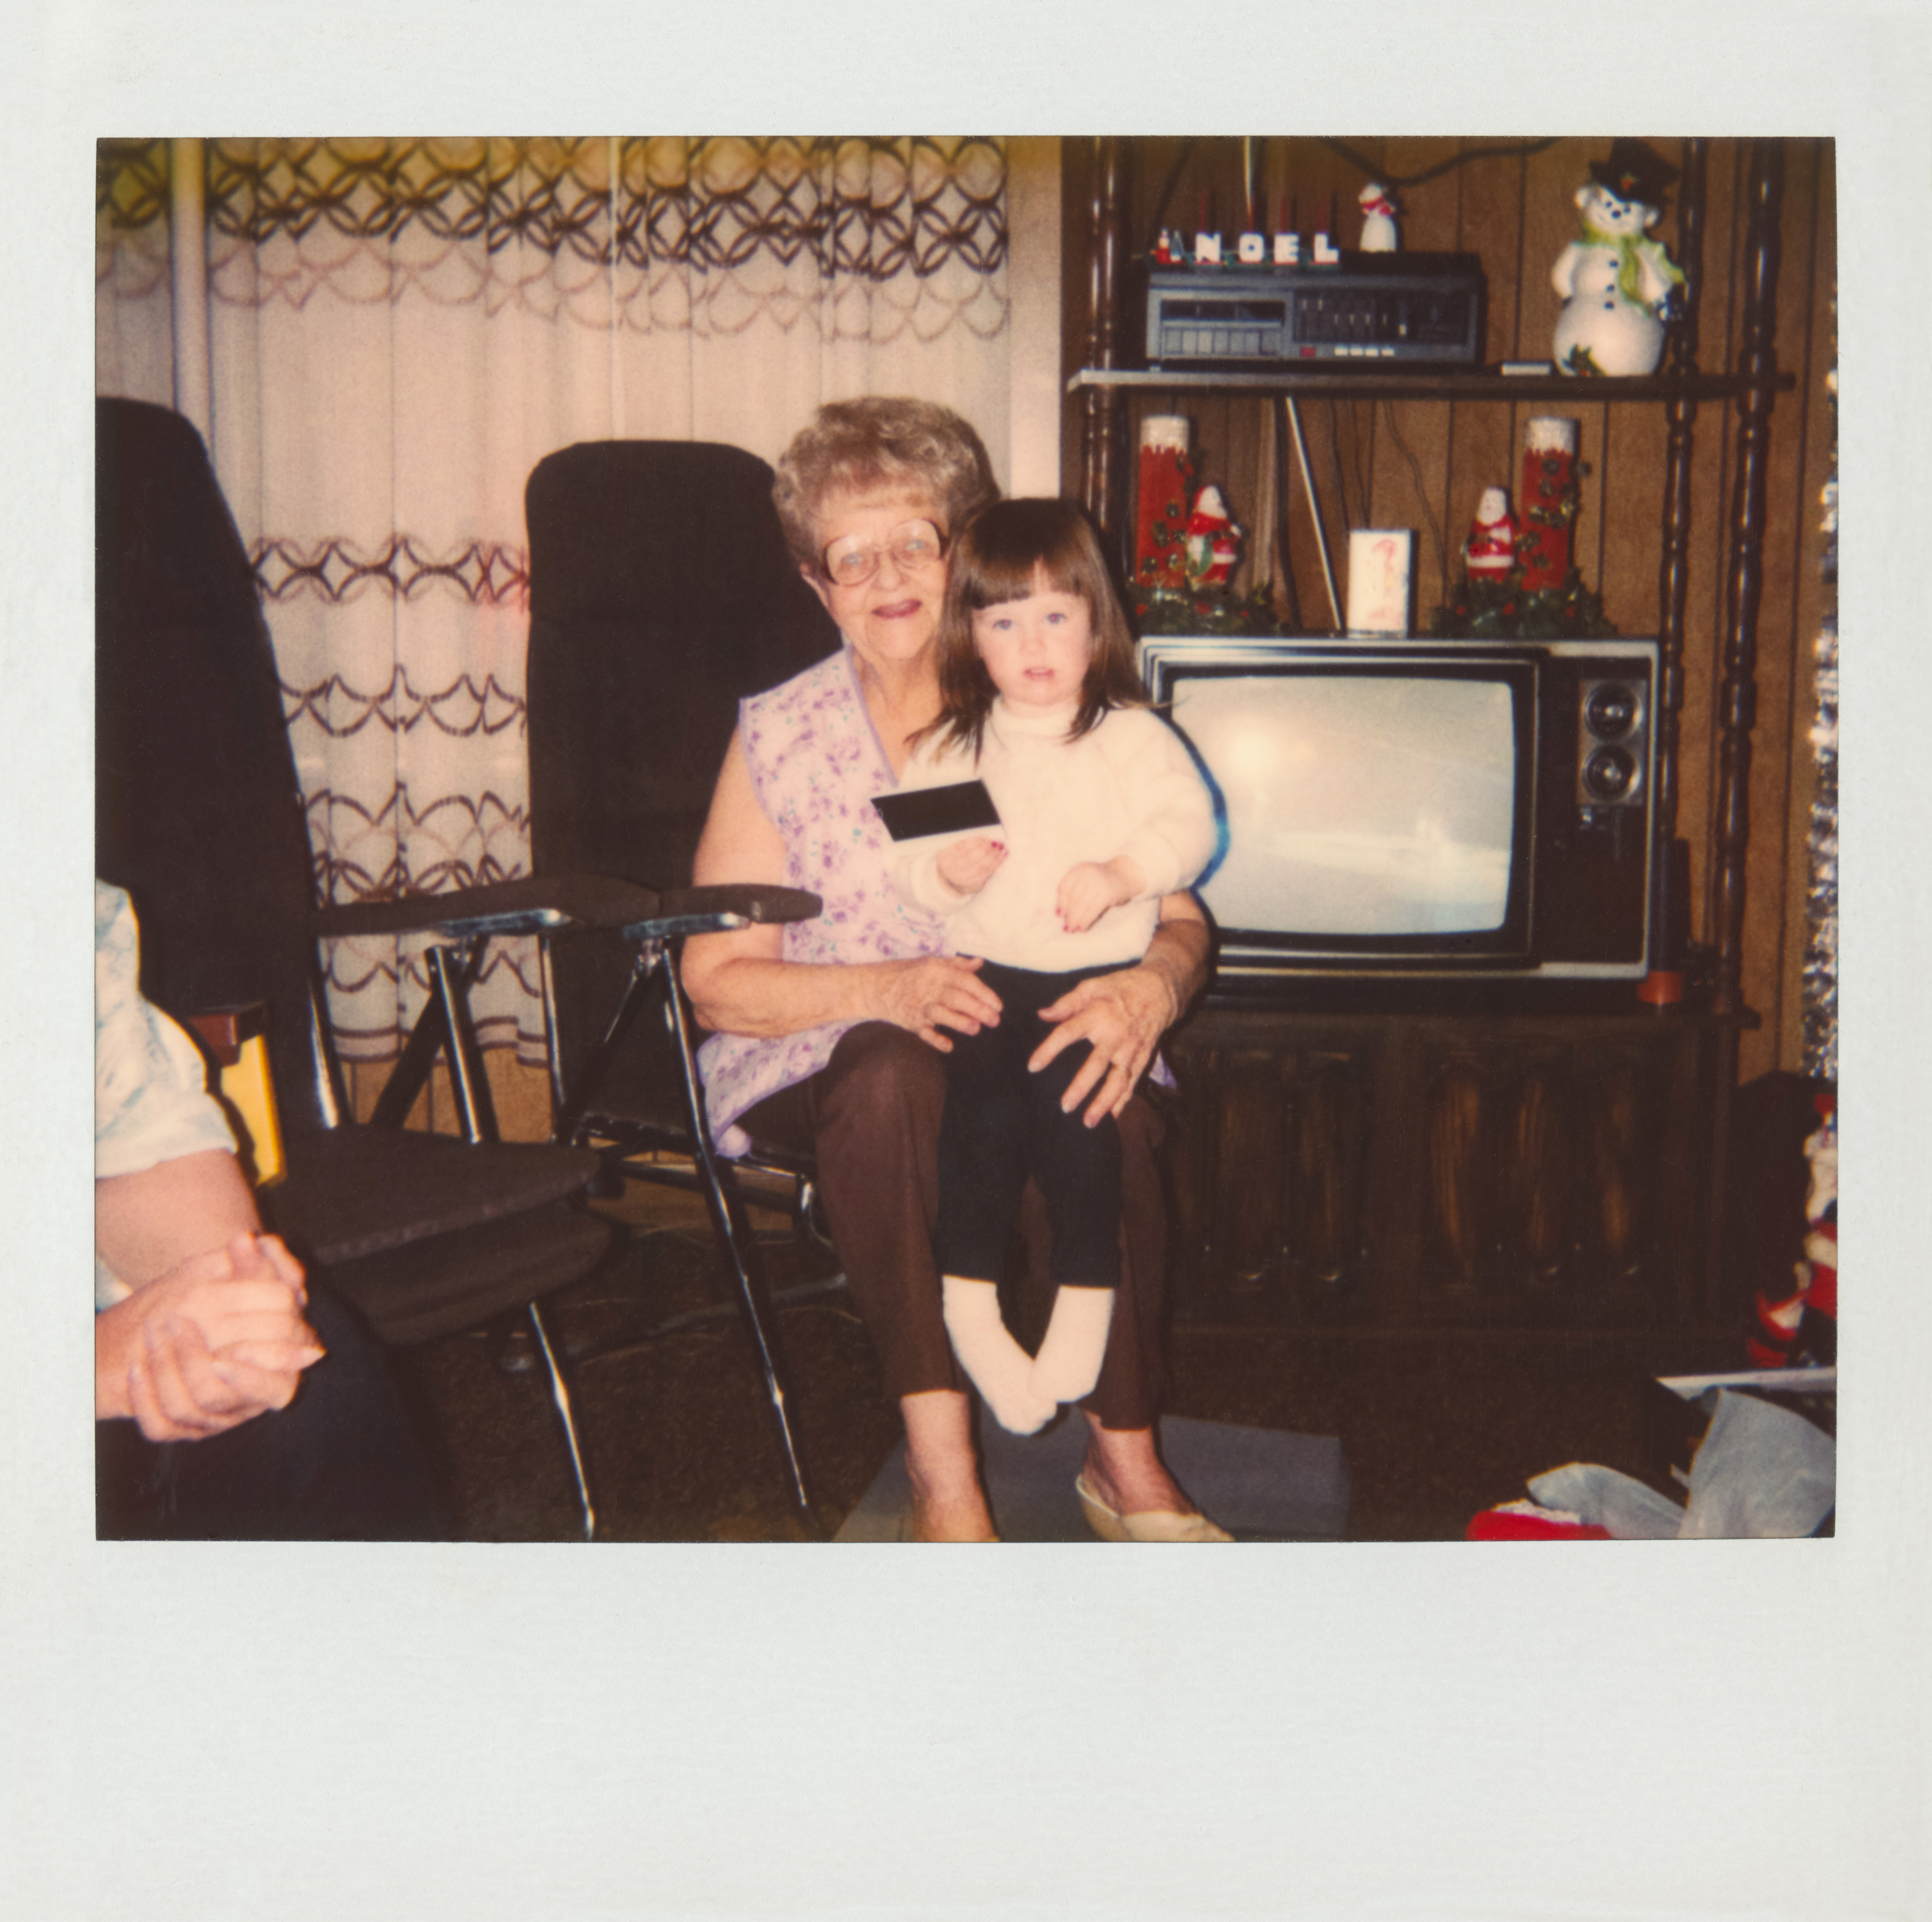 A Polaroid photo of a grandma and her grandchild sitting in front of a TV